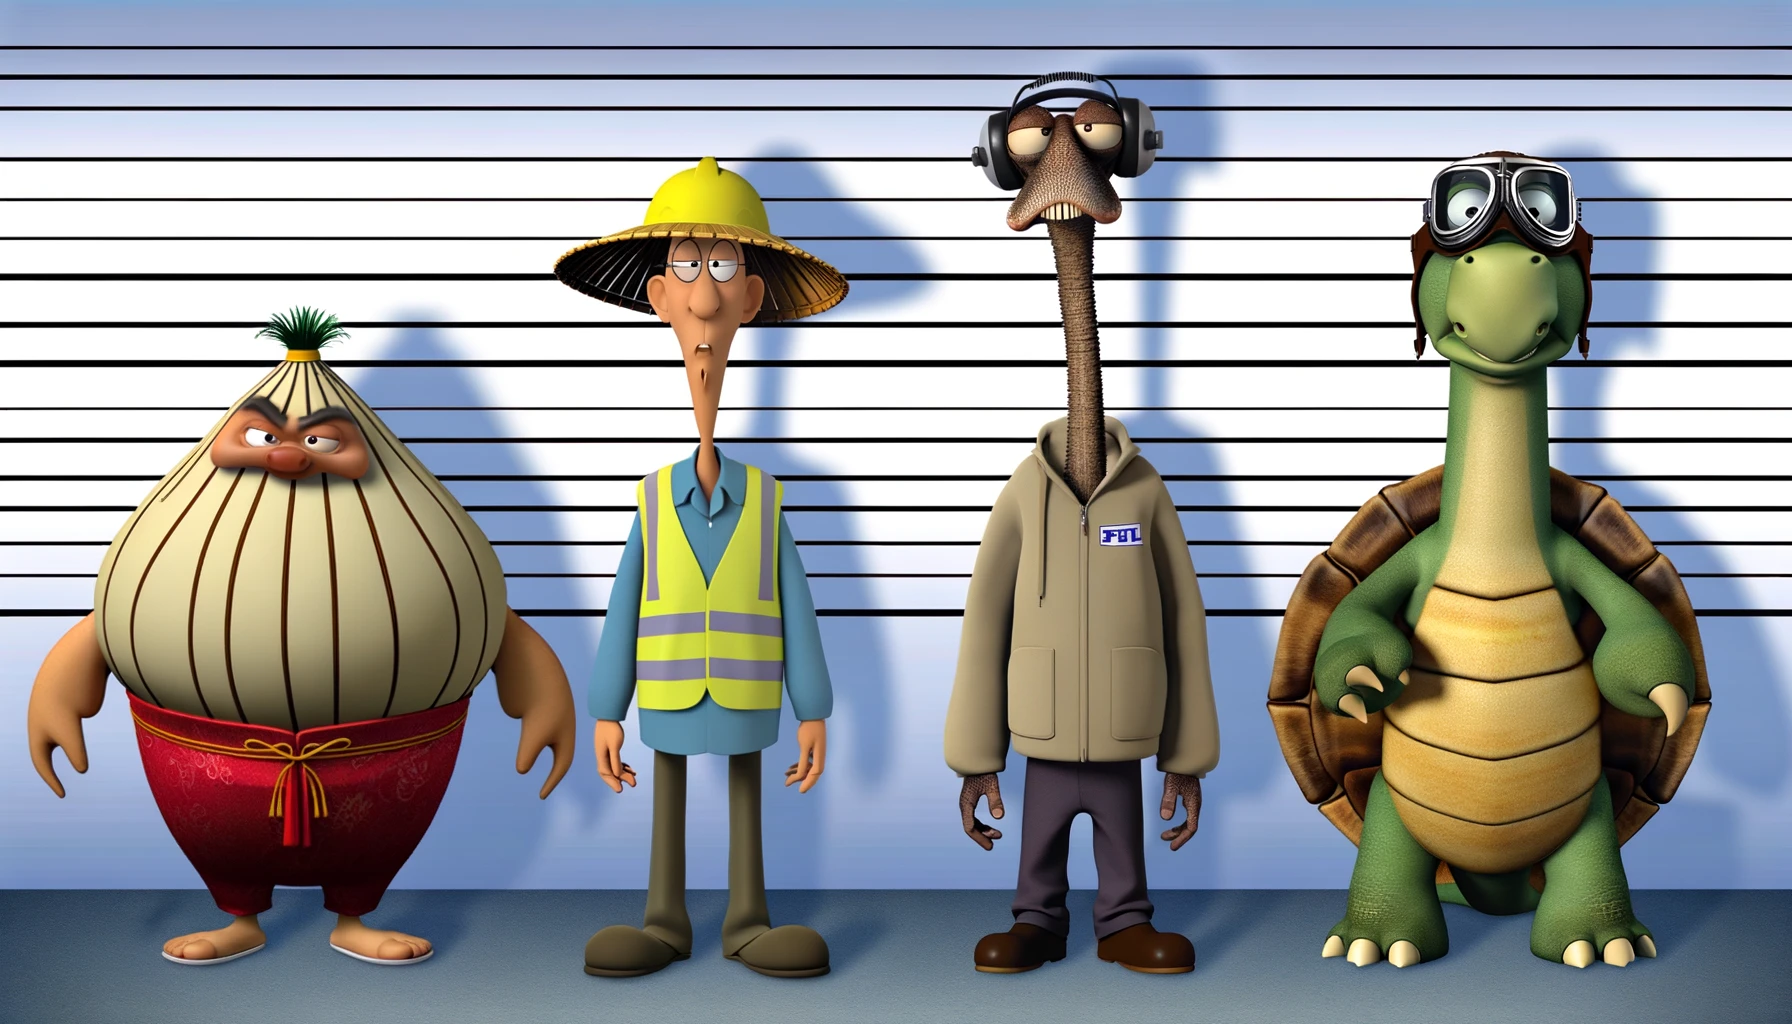 A suspect lineup featuring an anthropomorphic Chinese dumpling, a cartoon brontosaurus, a construction worker in hi-viz, and a turtle wearing flight goggles